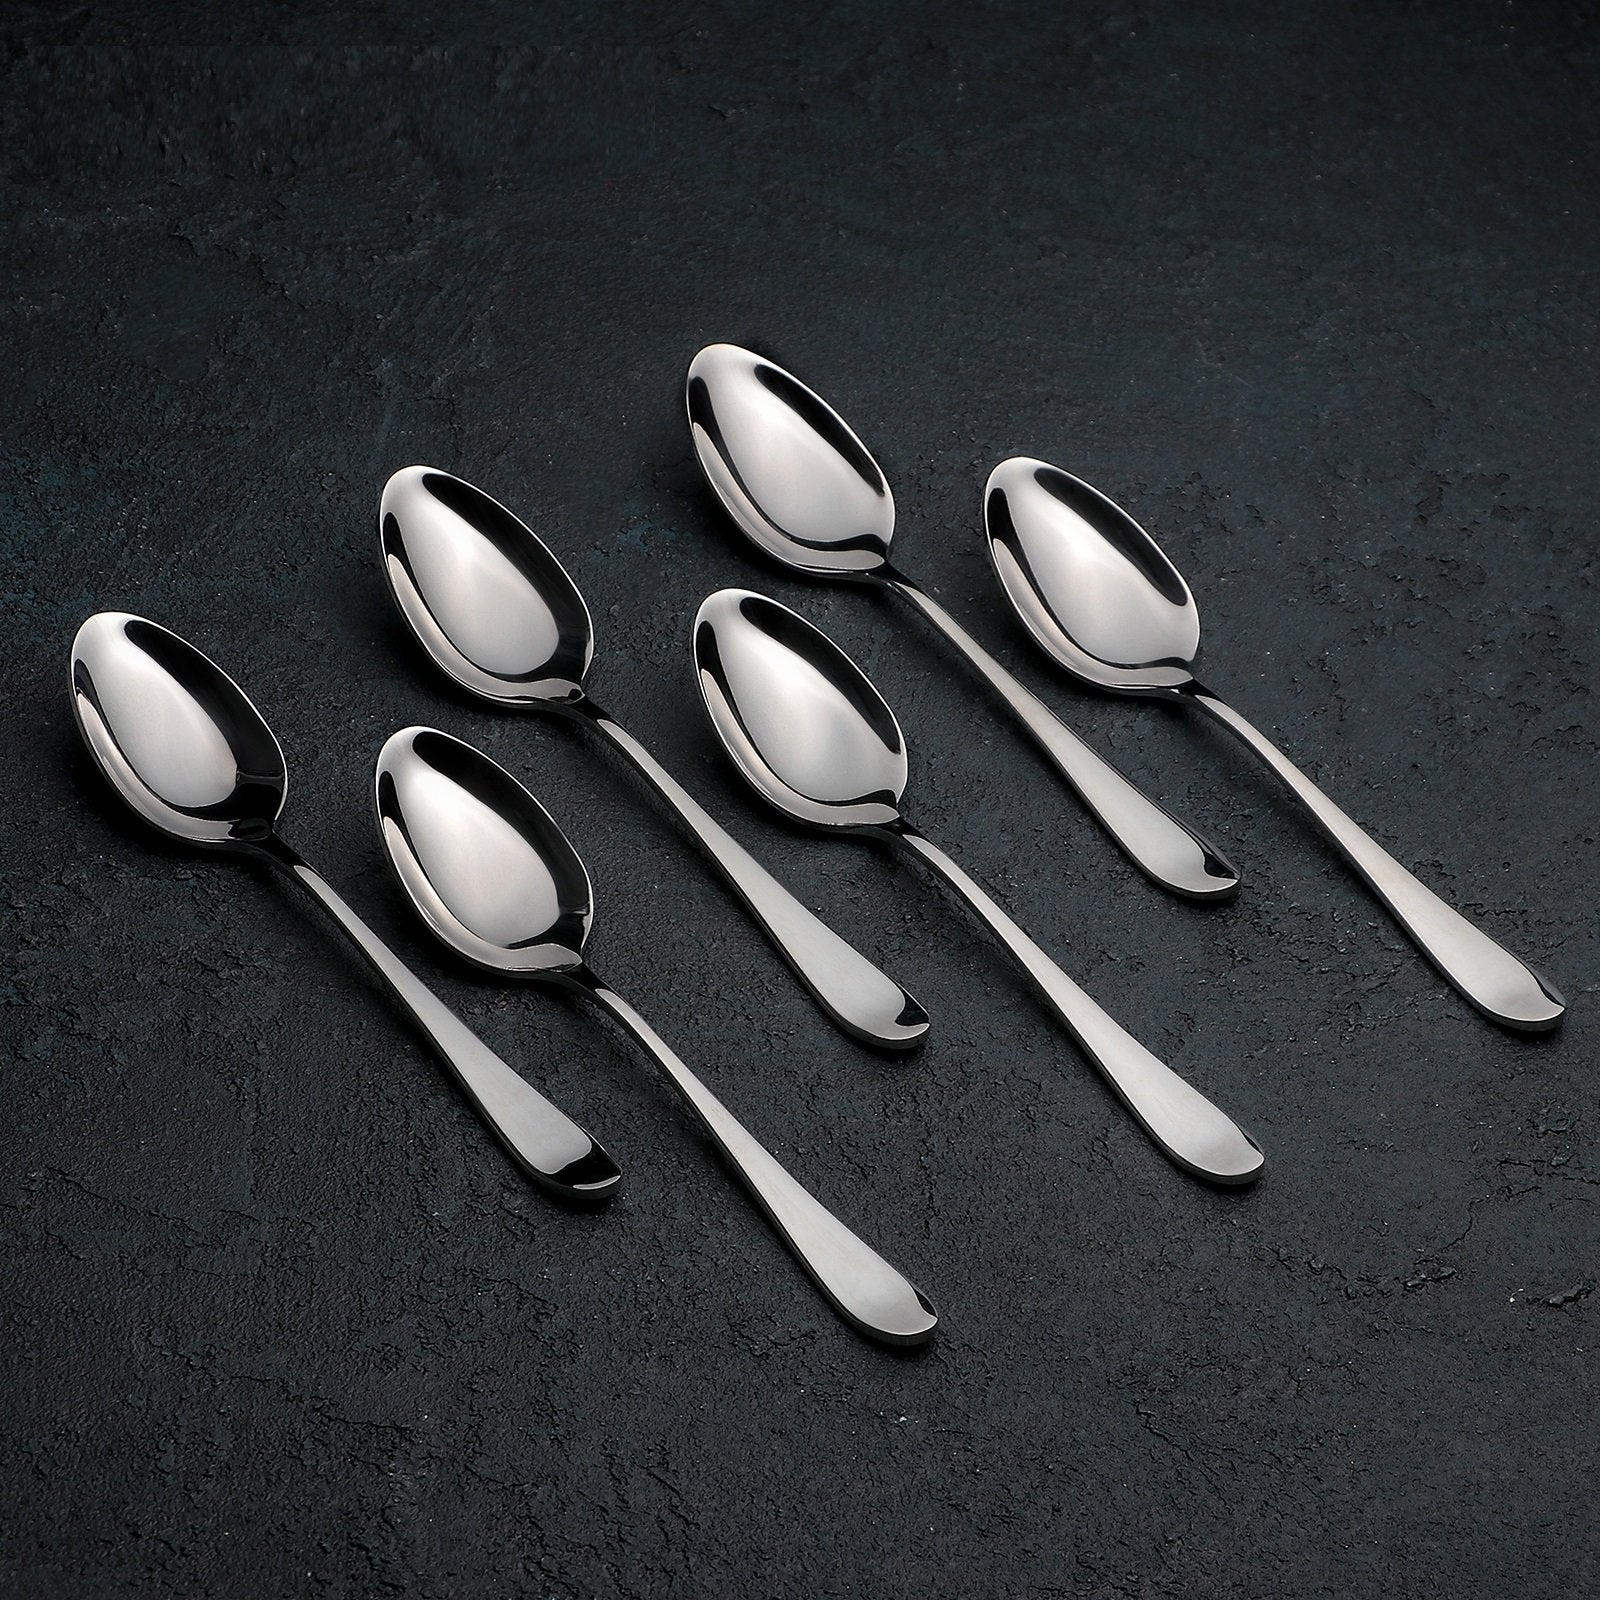 A Cup of Tea Makes Everything Better Engraved Teaspoon, 6 1/16 18/0  Stainless Steel Heavy Weight Teaspoon, Tea Time Spoon 